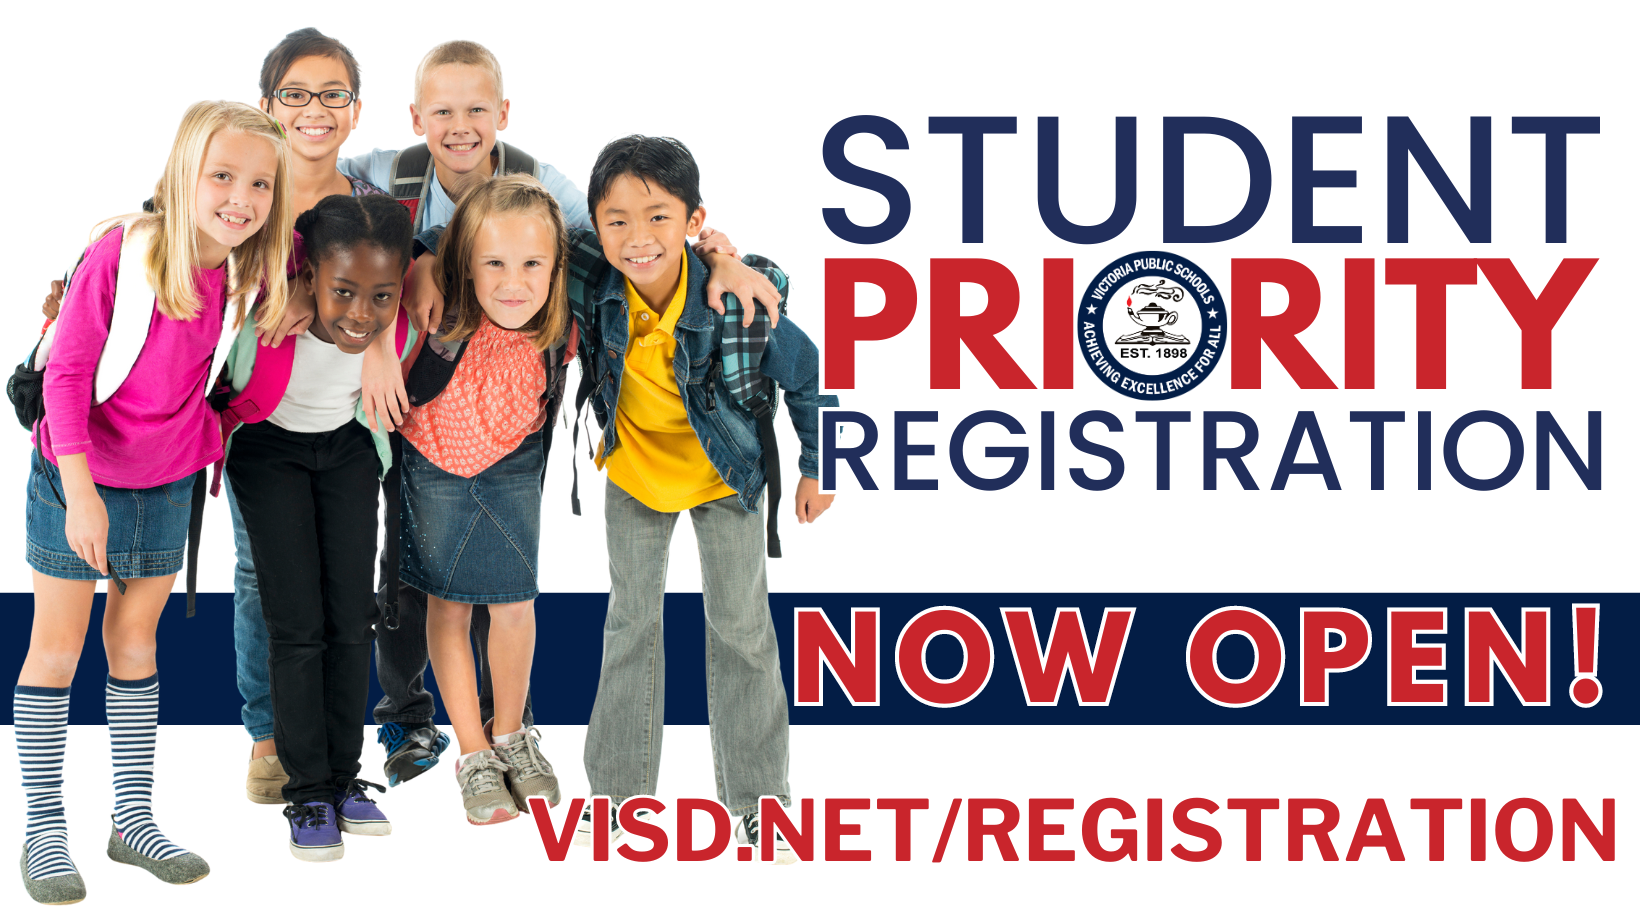 Student Priority Registration is now open